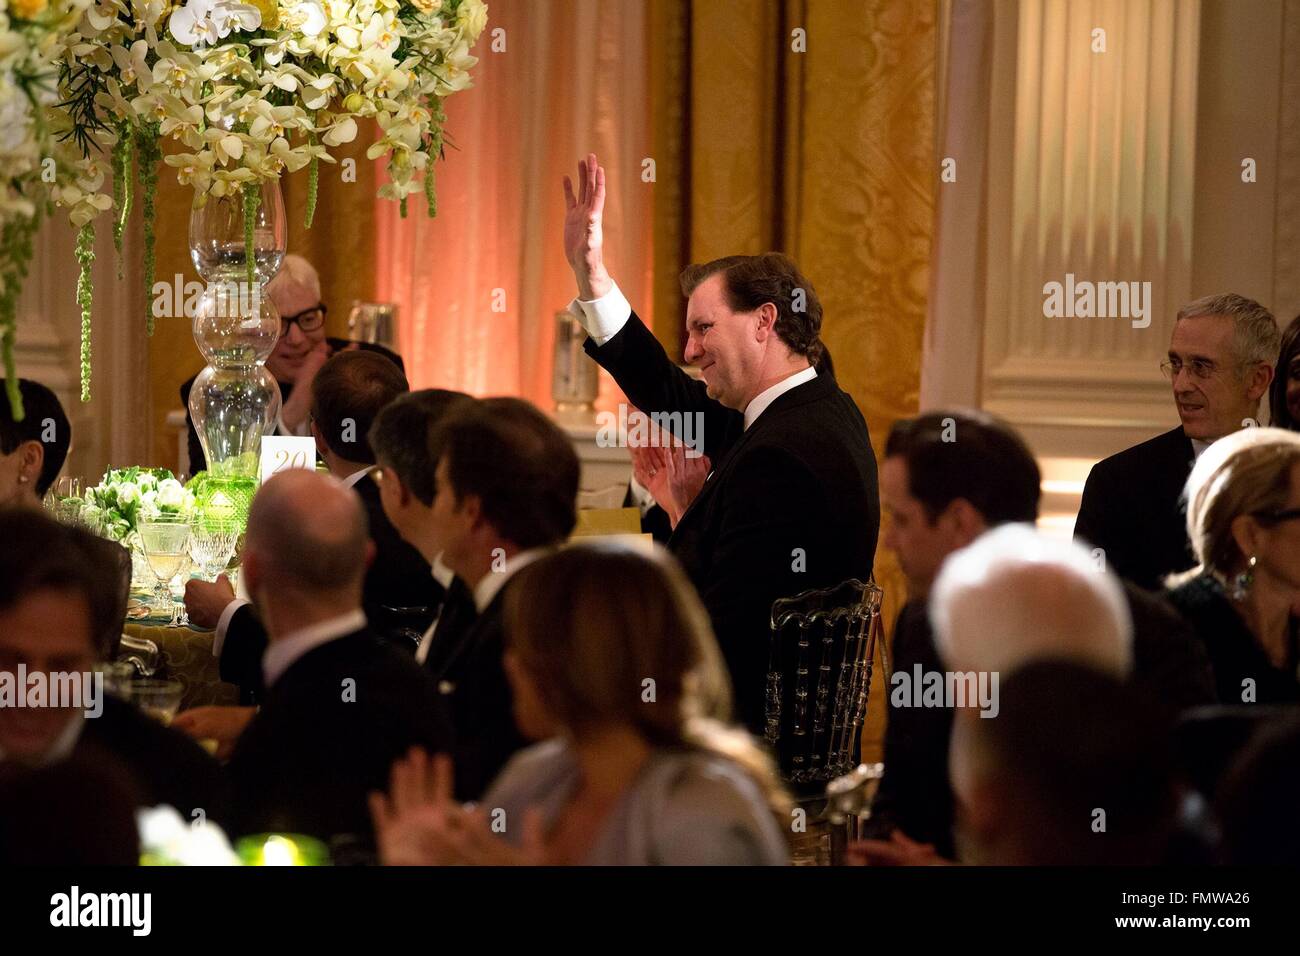 Marvin Nicholson, the personal aide to U.S. President Barack Obama waves after being acknowledged during the President's remarks at the State Dinner for Canadian Prime Minister Justin Trudeau in the East Room of the White House March 10, 2016 in Washington, DC. This is the first state visit by a Canadian Prime Minister in 20-years. Stock Photo